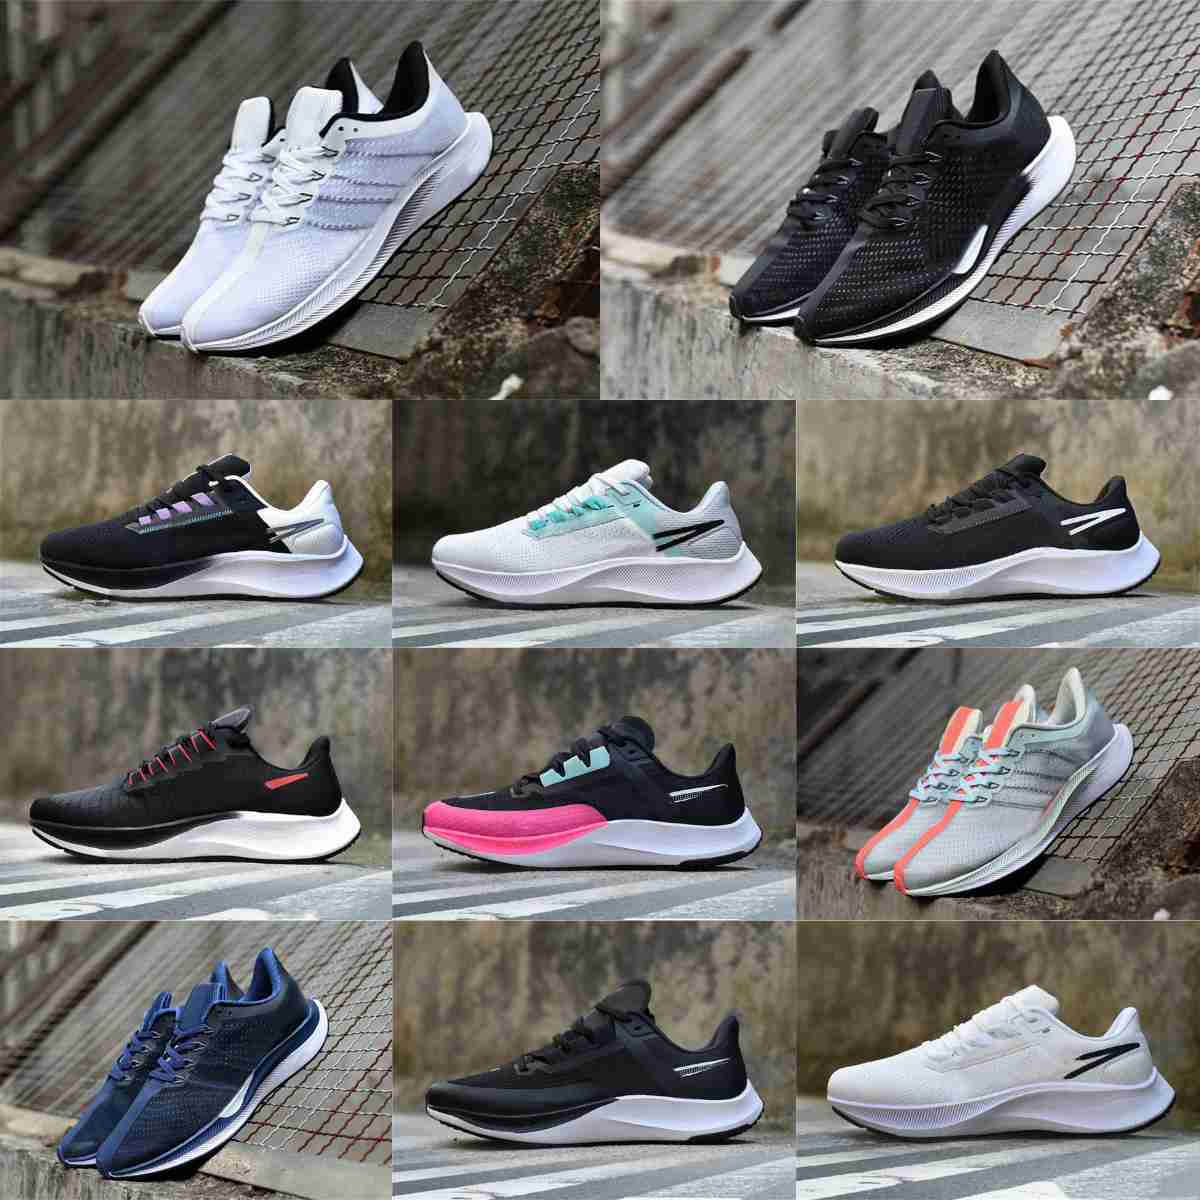 

Designers Pegasus Be True 37 39 35 Turbo Casual Running Shoes ZOOM Chlorine Blue Ribbon Green Wolf Grey Flyease 38 Triple White Midnight Black Navy Trainers Sneakers, Please contact us